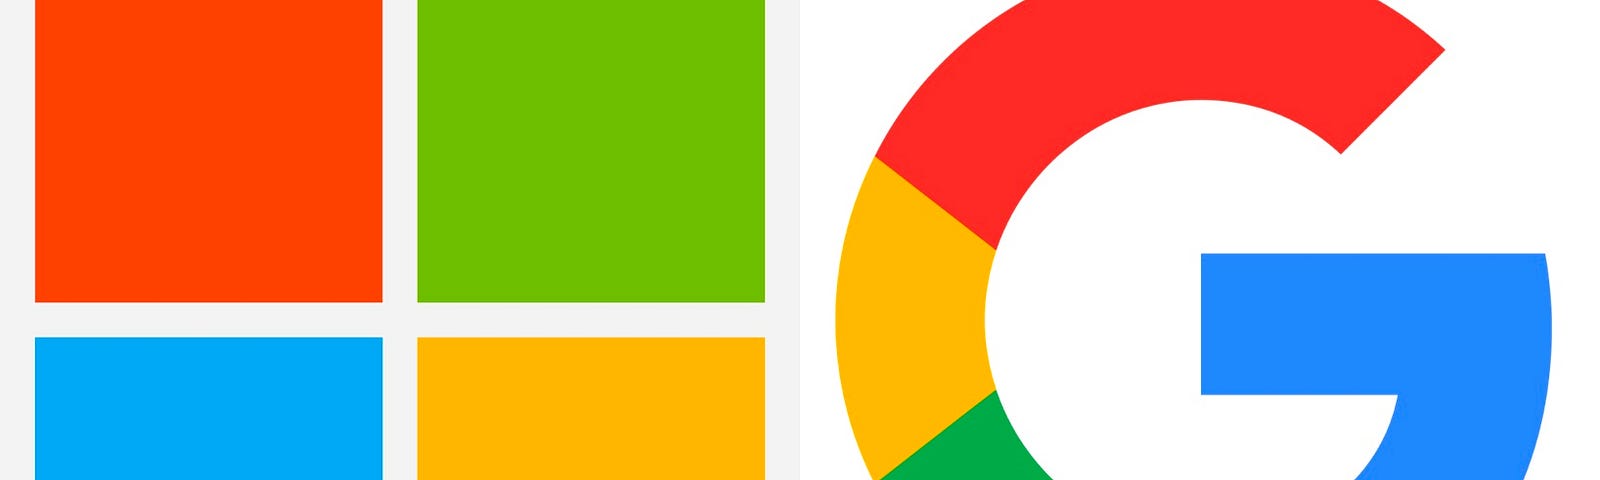 IMAGE: The Microsoft and Google logos side by side